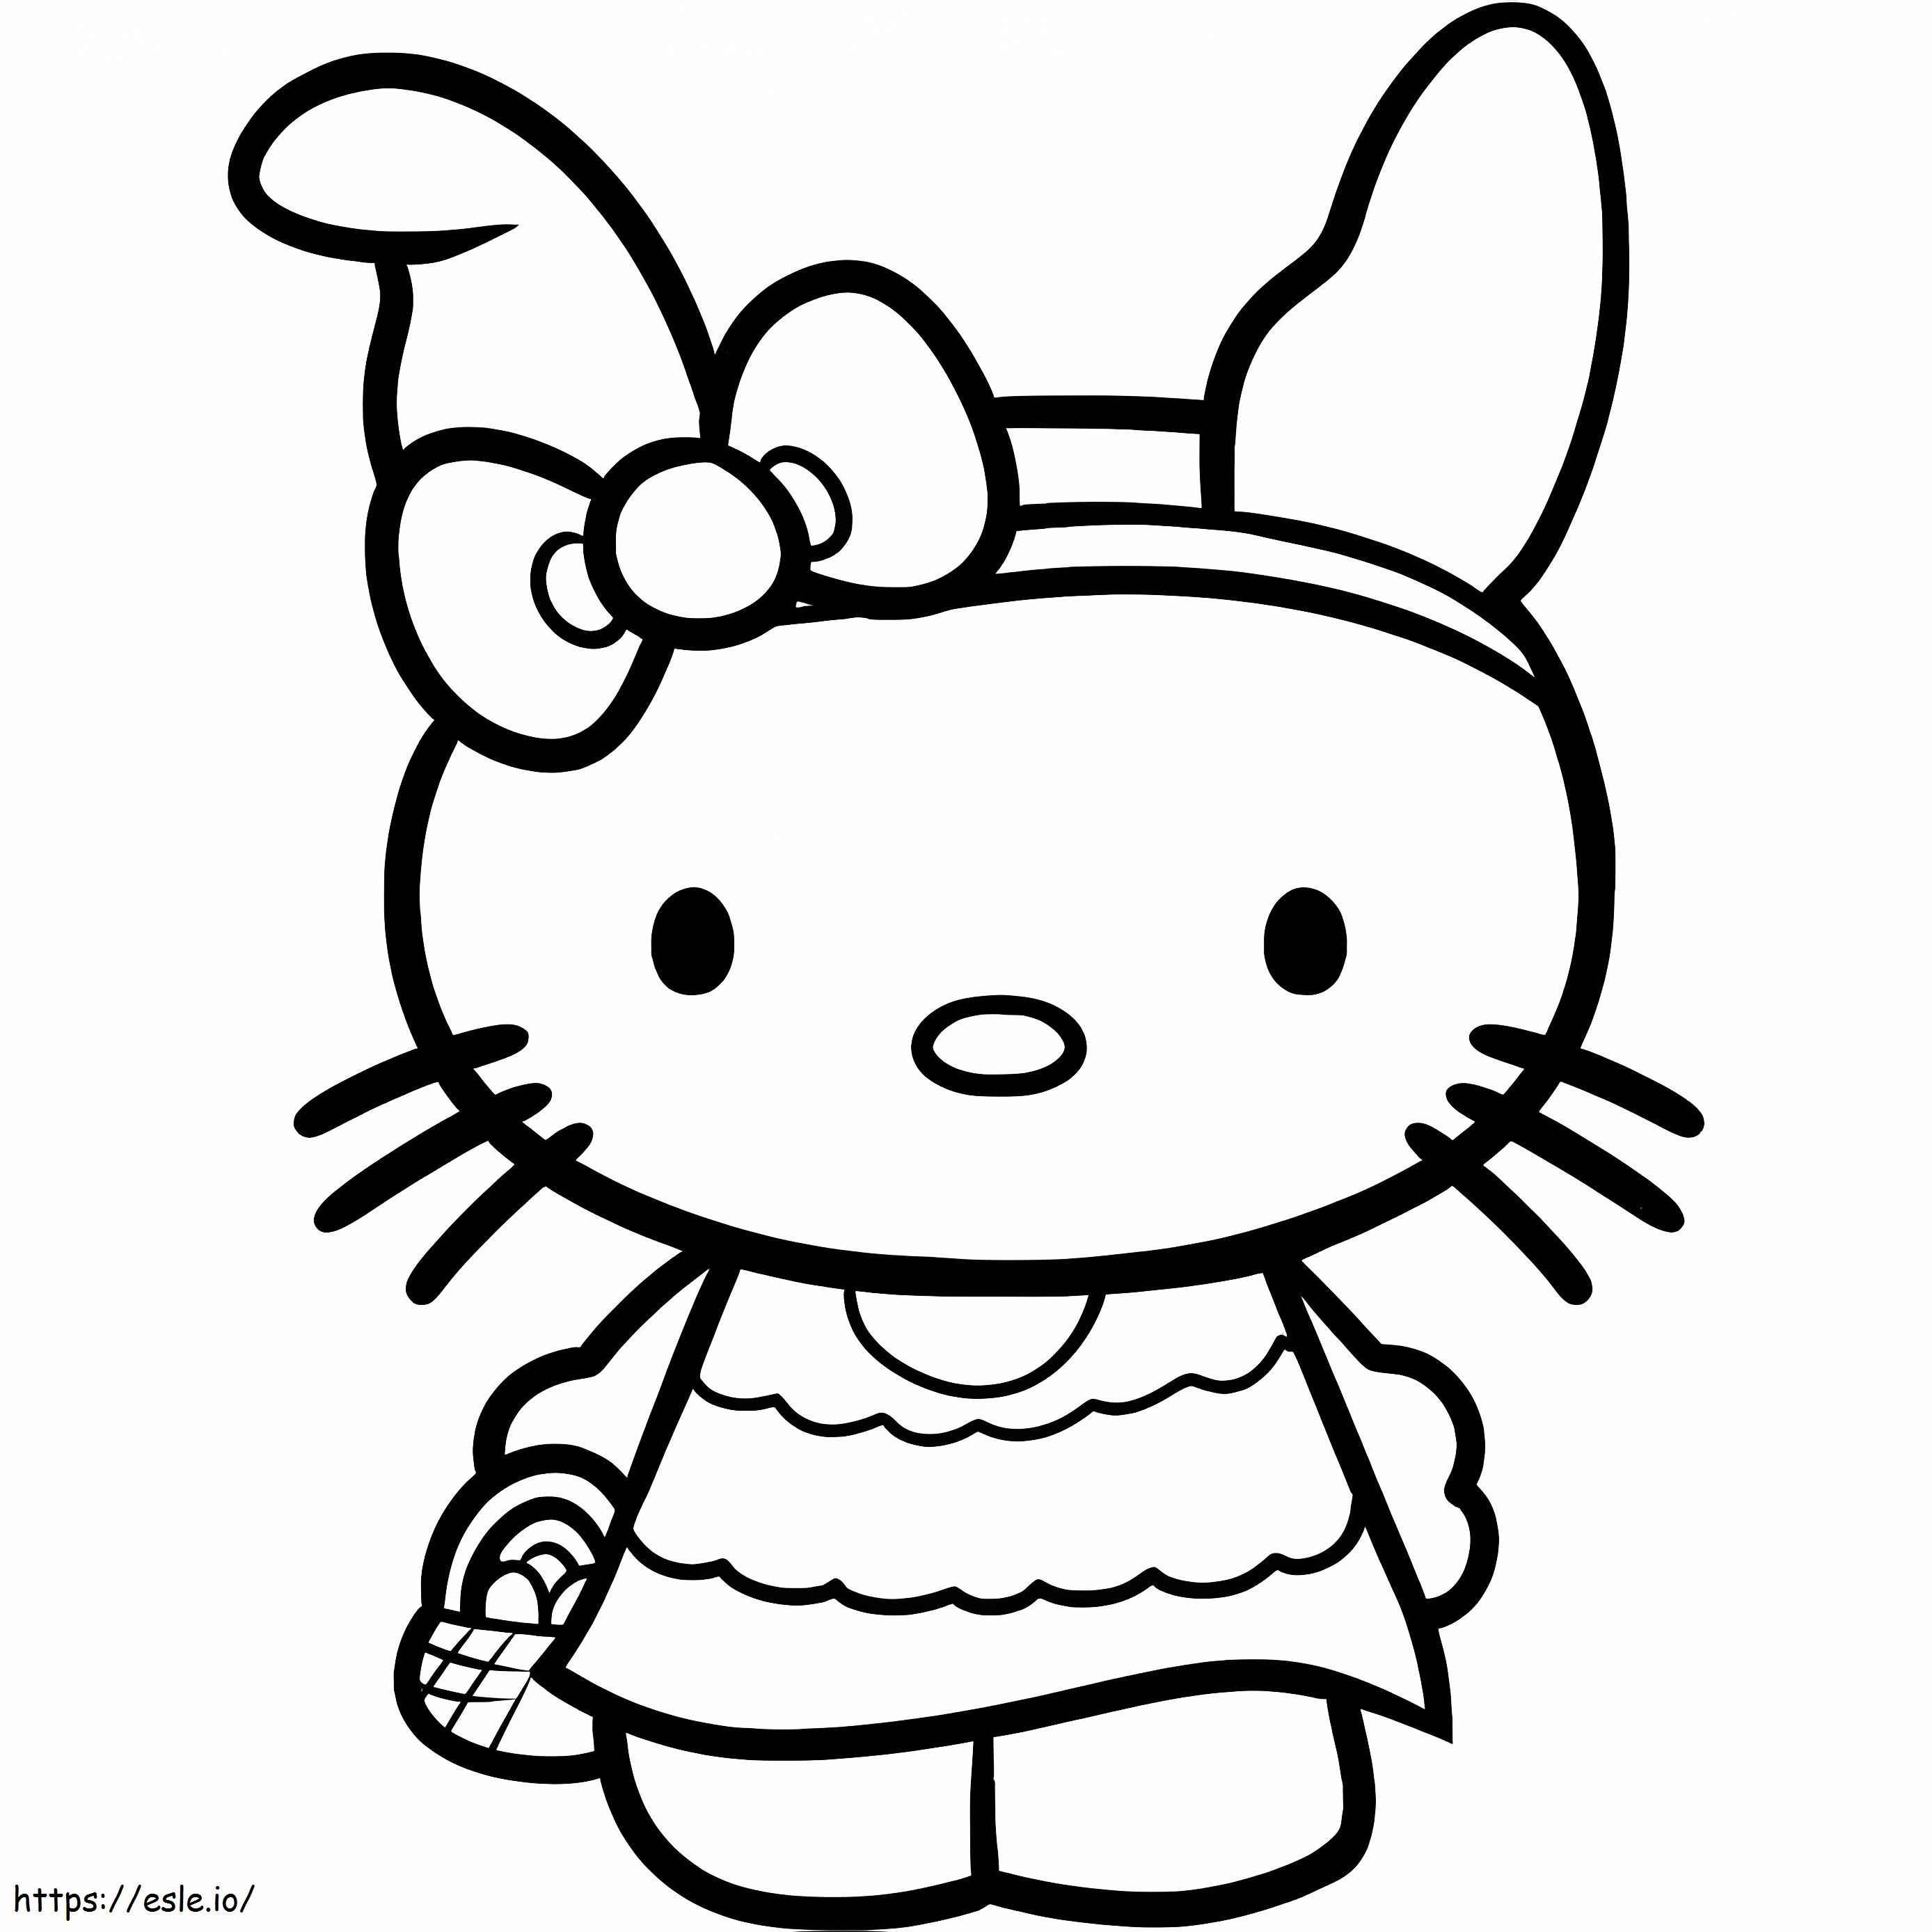 Gran Hello Kitty coloring page